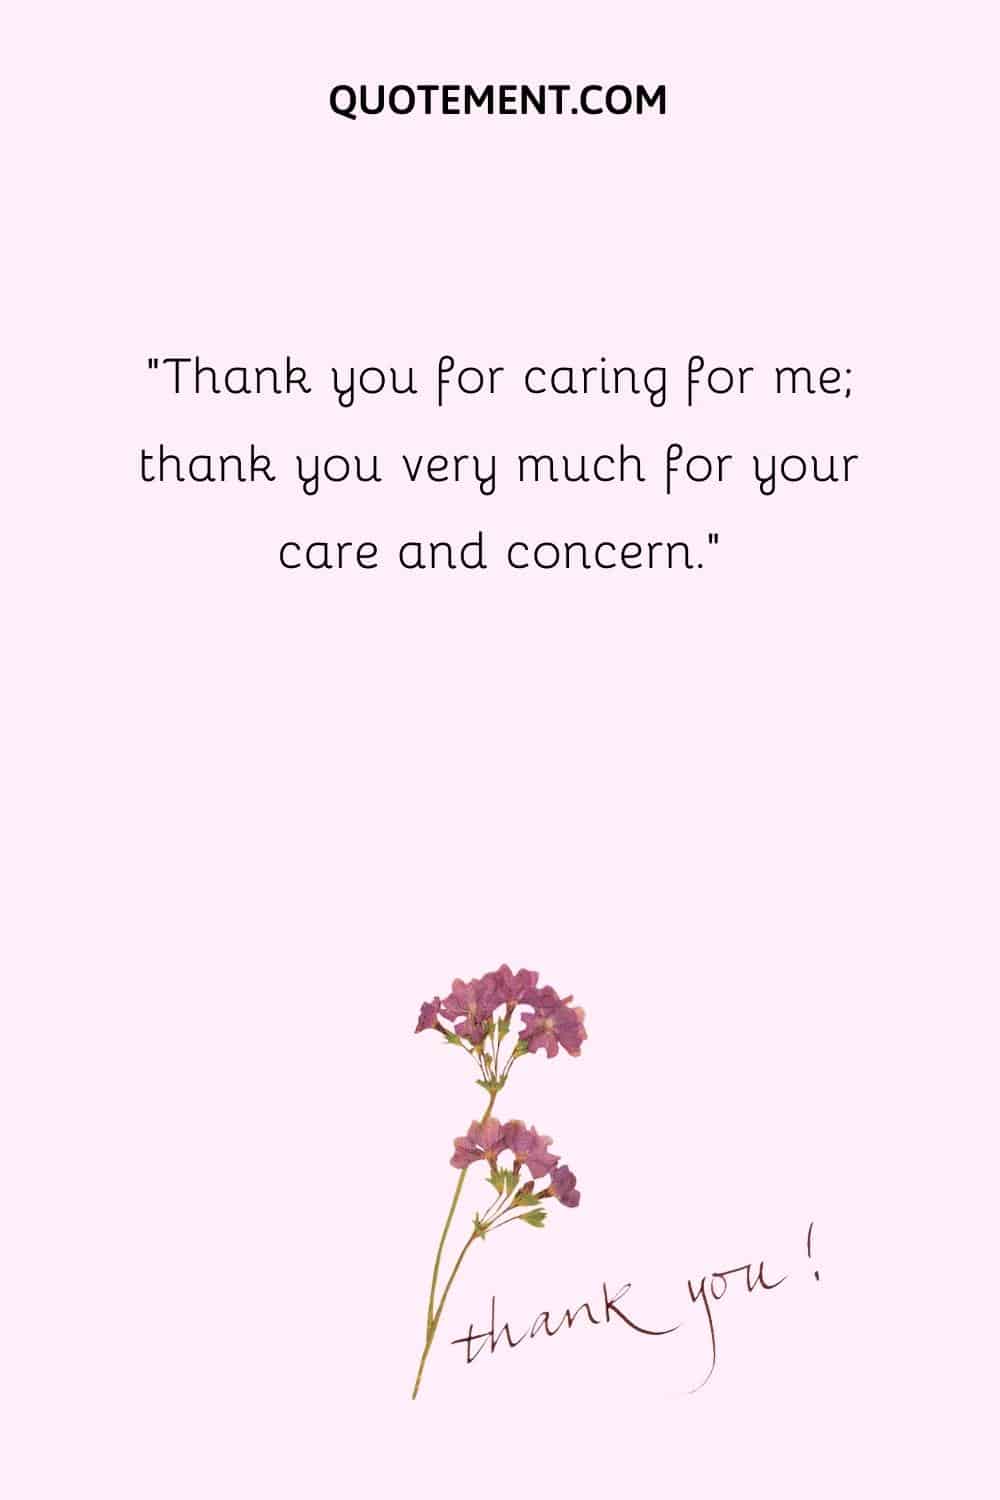 Thank you for caring for me; thank you very much for your care and concern.